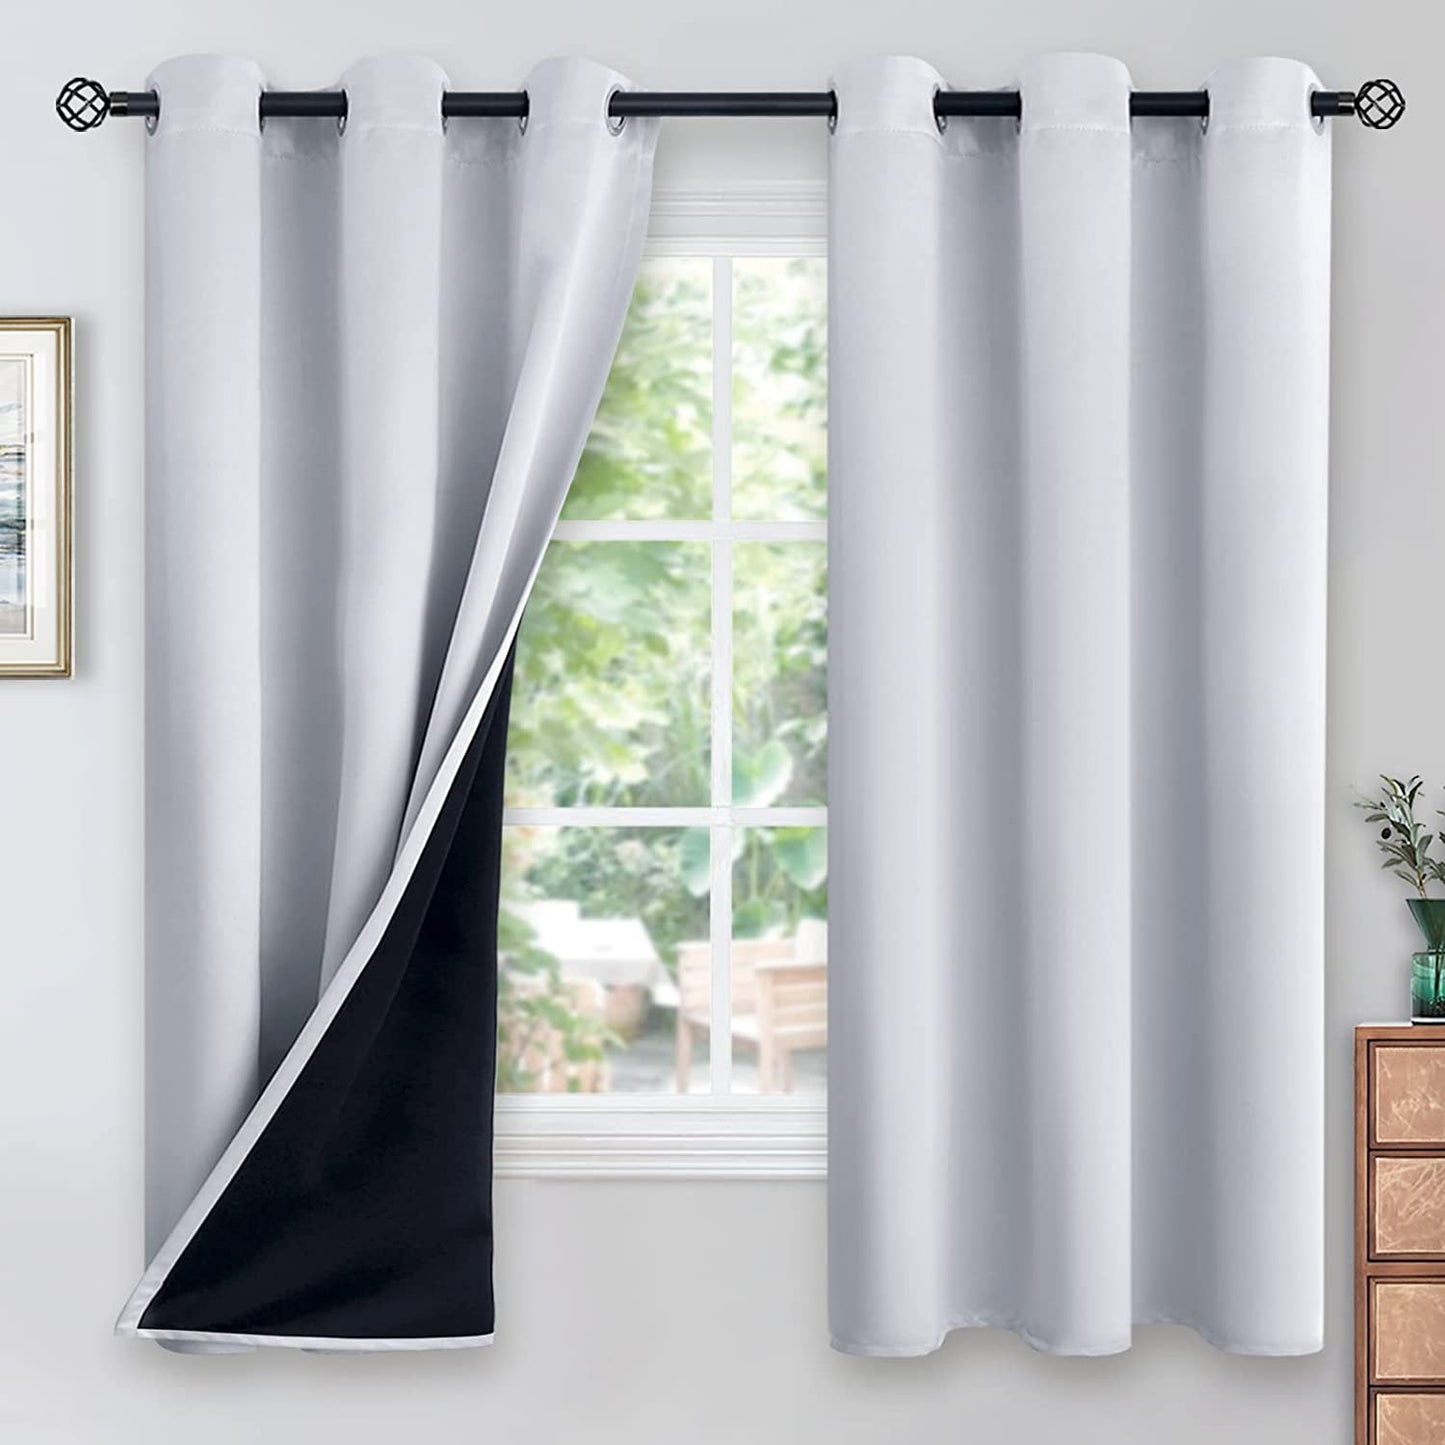 Youngstex Black 100% Blackout Curtains 63 Inches for Bedroom Thermal Insulated Total Room Darkening Curtains for Living Room Window with Black Back Grommet, 2 Panels, 42 X 63 Inch  YoungsTex Greyish White 42W X 63L 